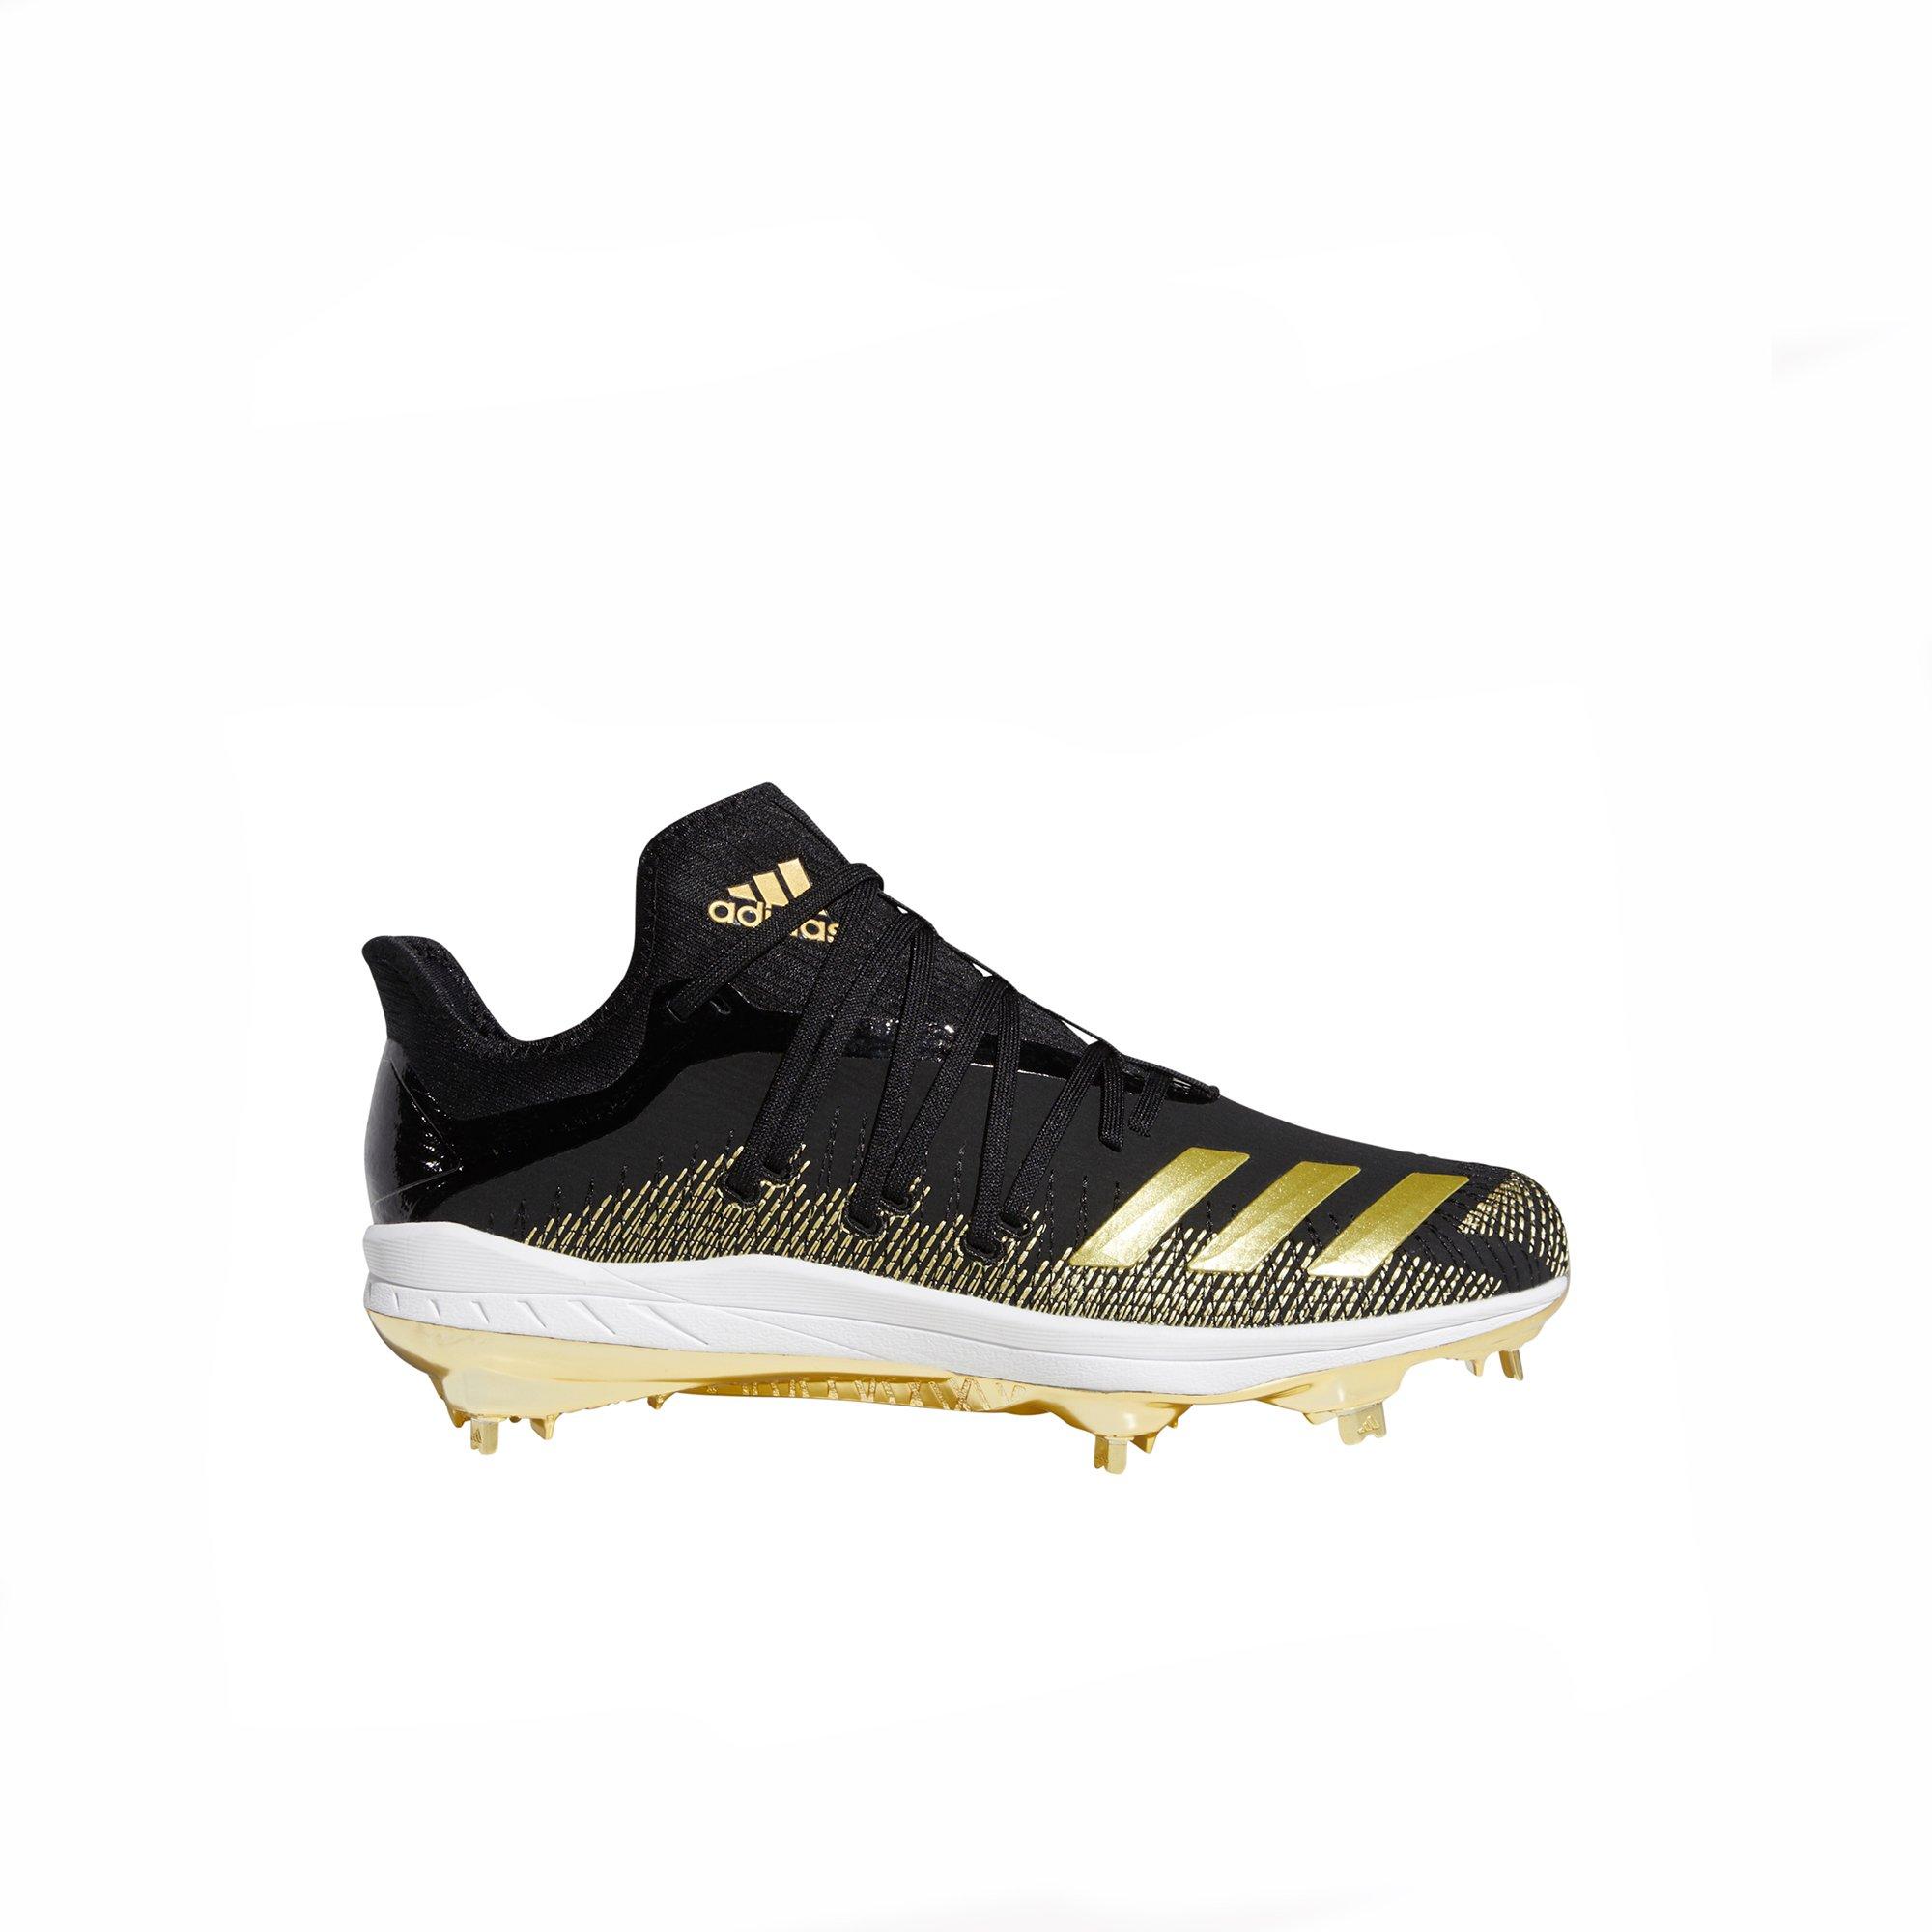 white and gold adidas cleats baseball